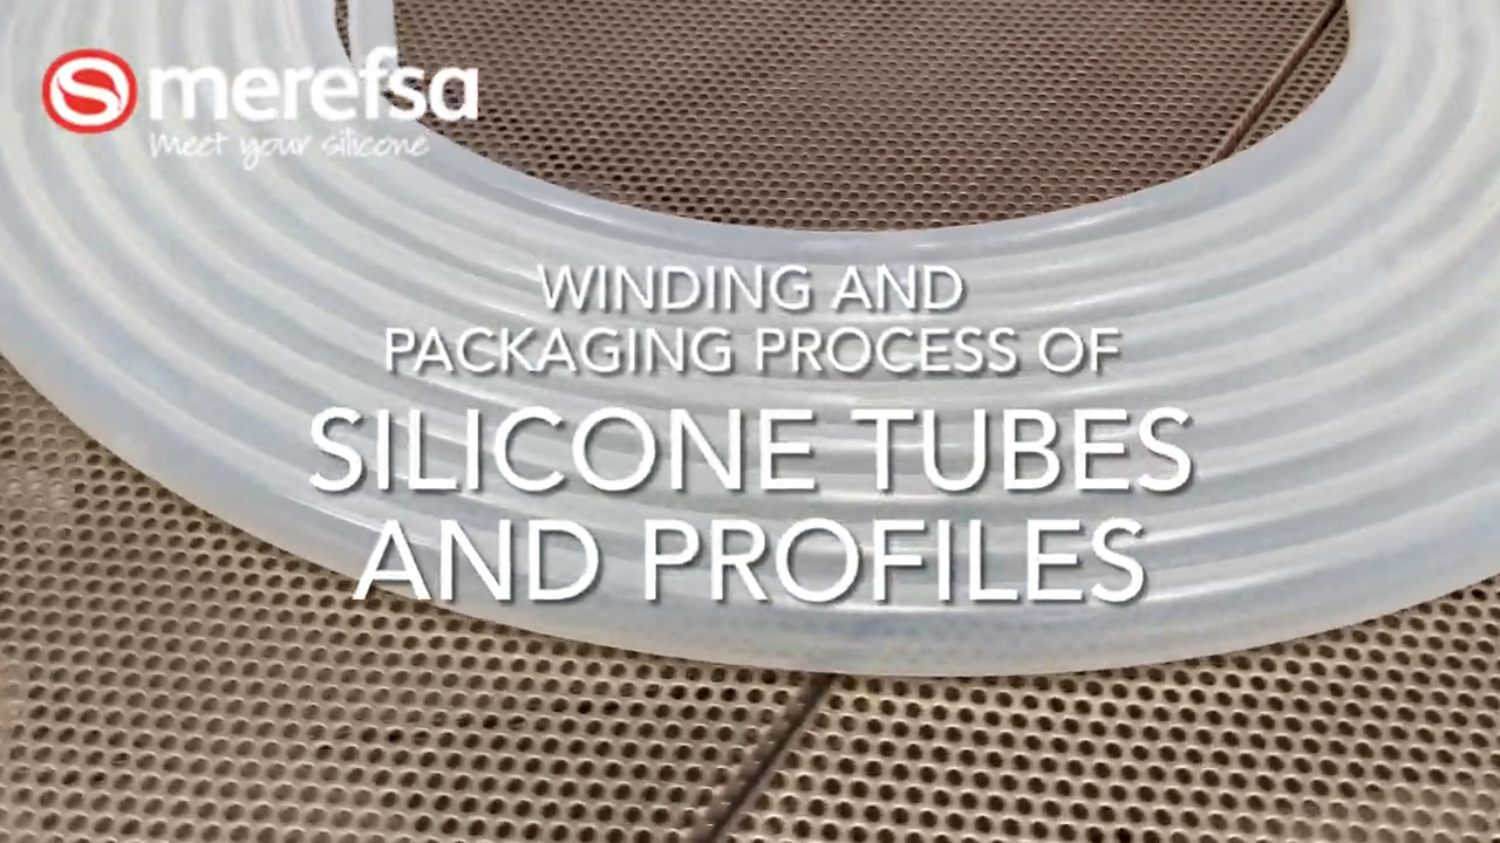 Winding and packaging process of silicone tubes and profiles 